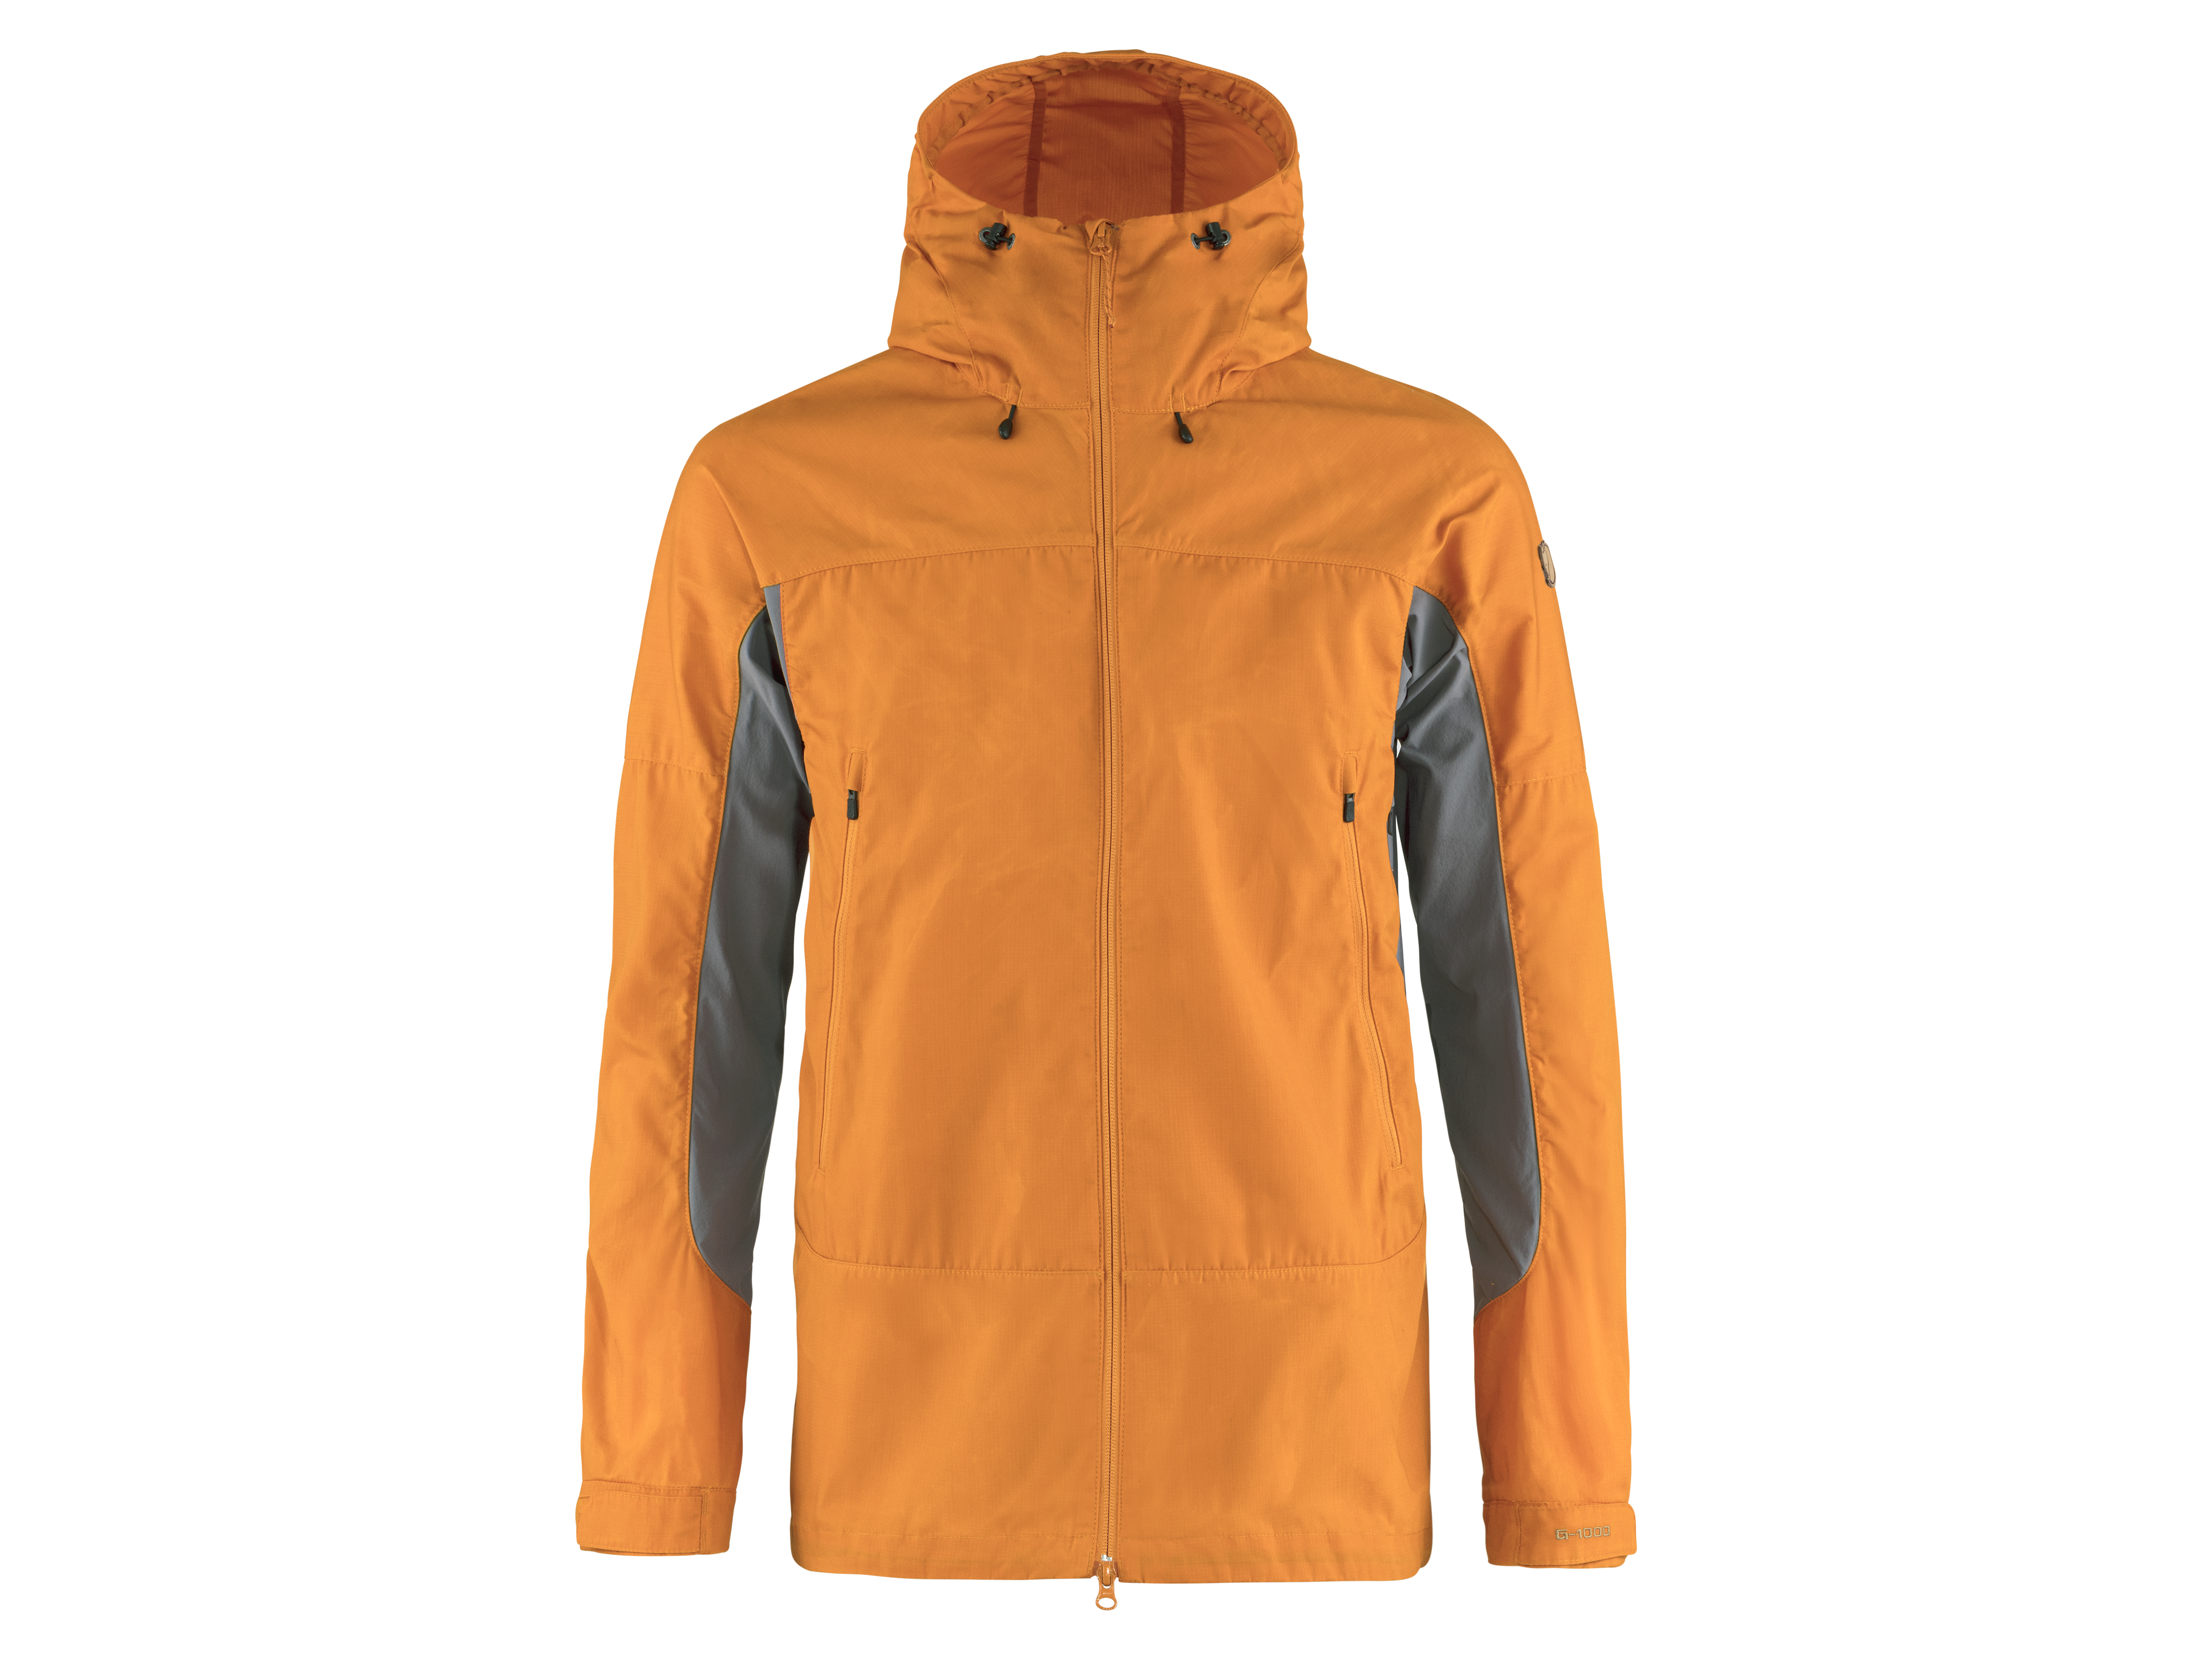 The warmer months still call for something lightweight like this Abisko Lite Trekking Jacket that protects you from showers and chilly winds